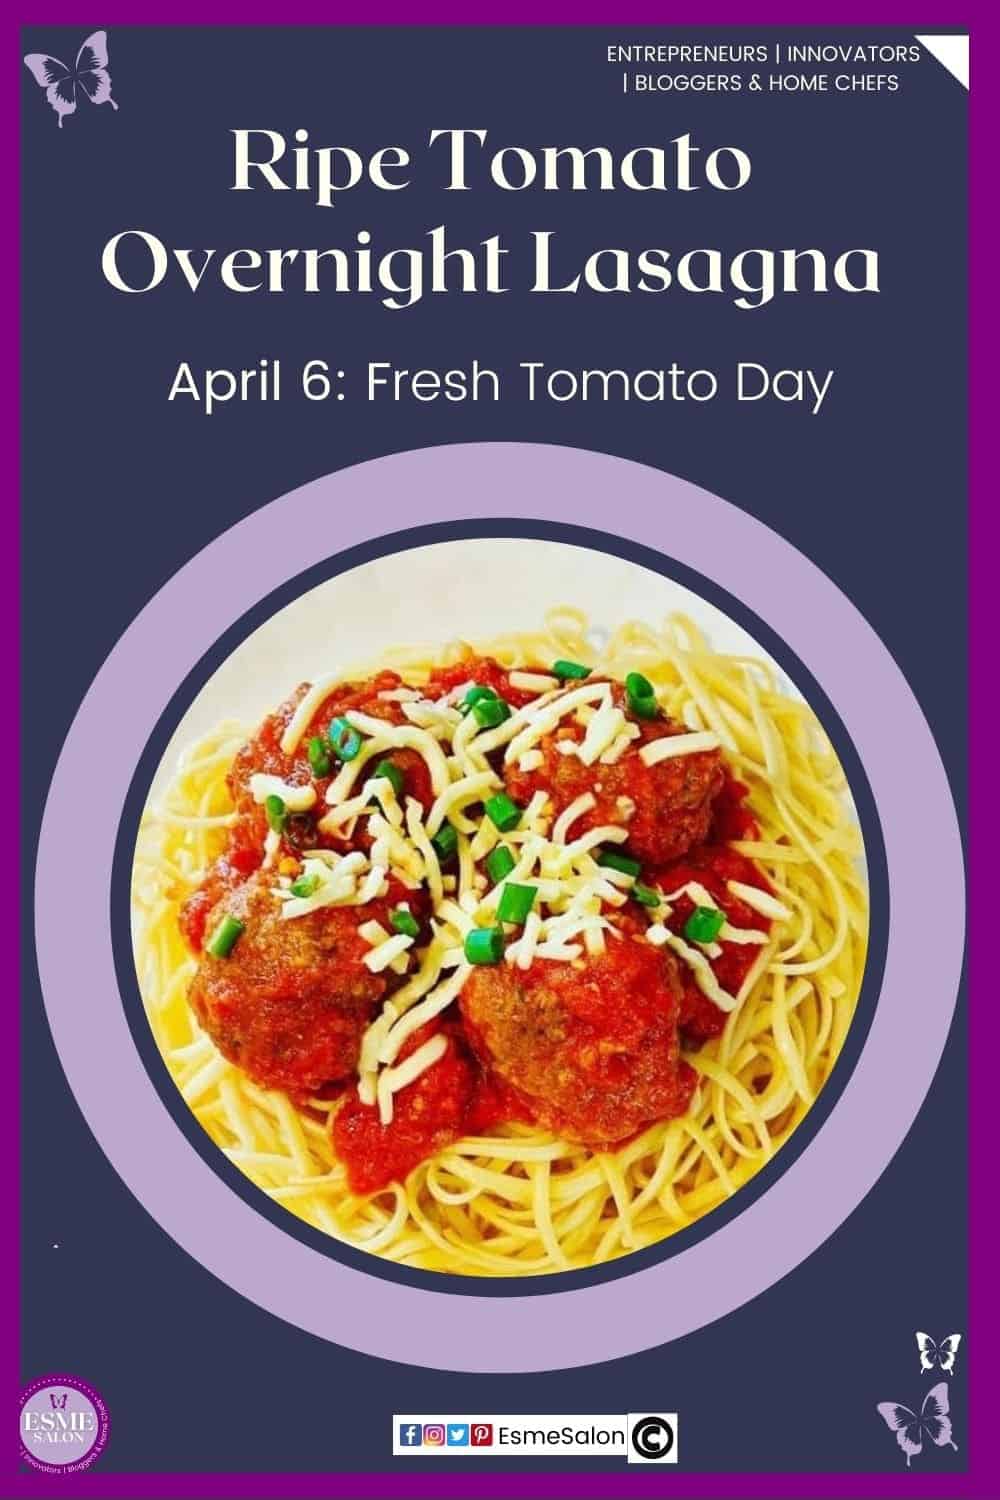 an image of a white plate filled with pasta and Ripe Tomato Overnight Lasagna and meatballs topped with cheese